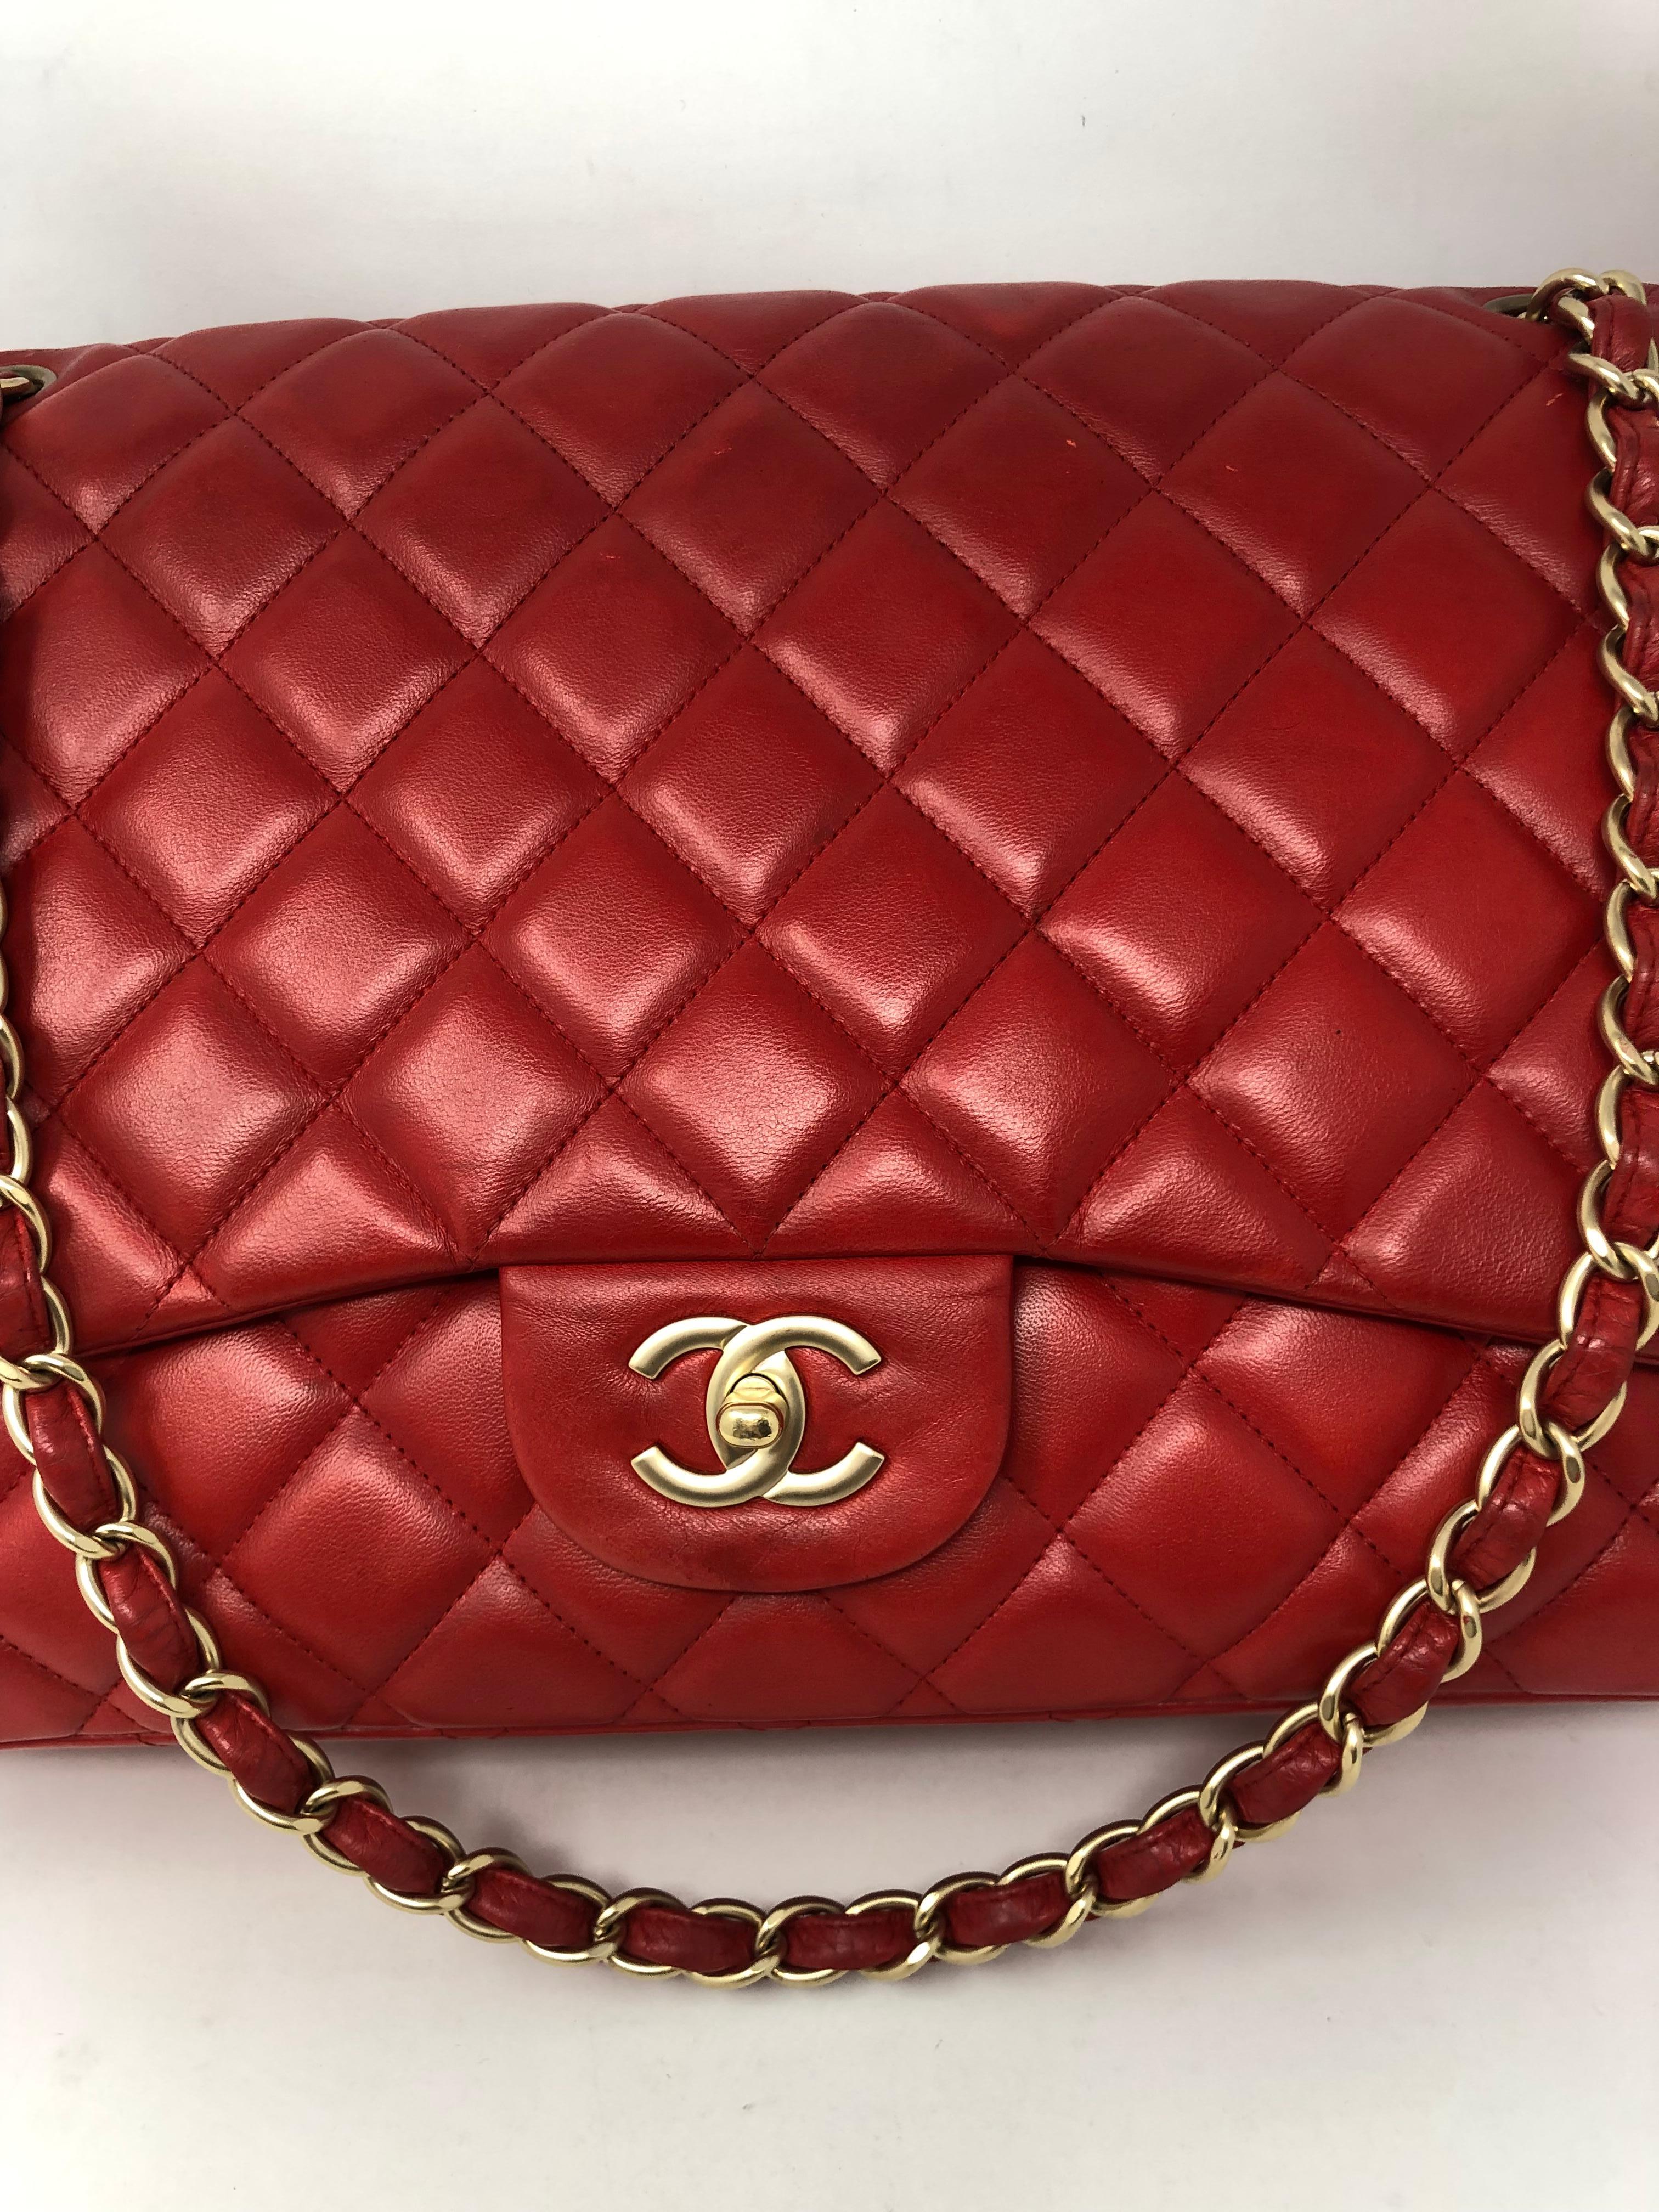 Chanel Red Leather Maxi Bag. Gold hardware. Good condition with light wear. Matte gold chain and clasp. Maxi size 13